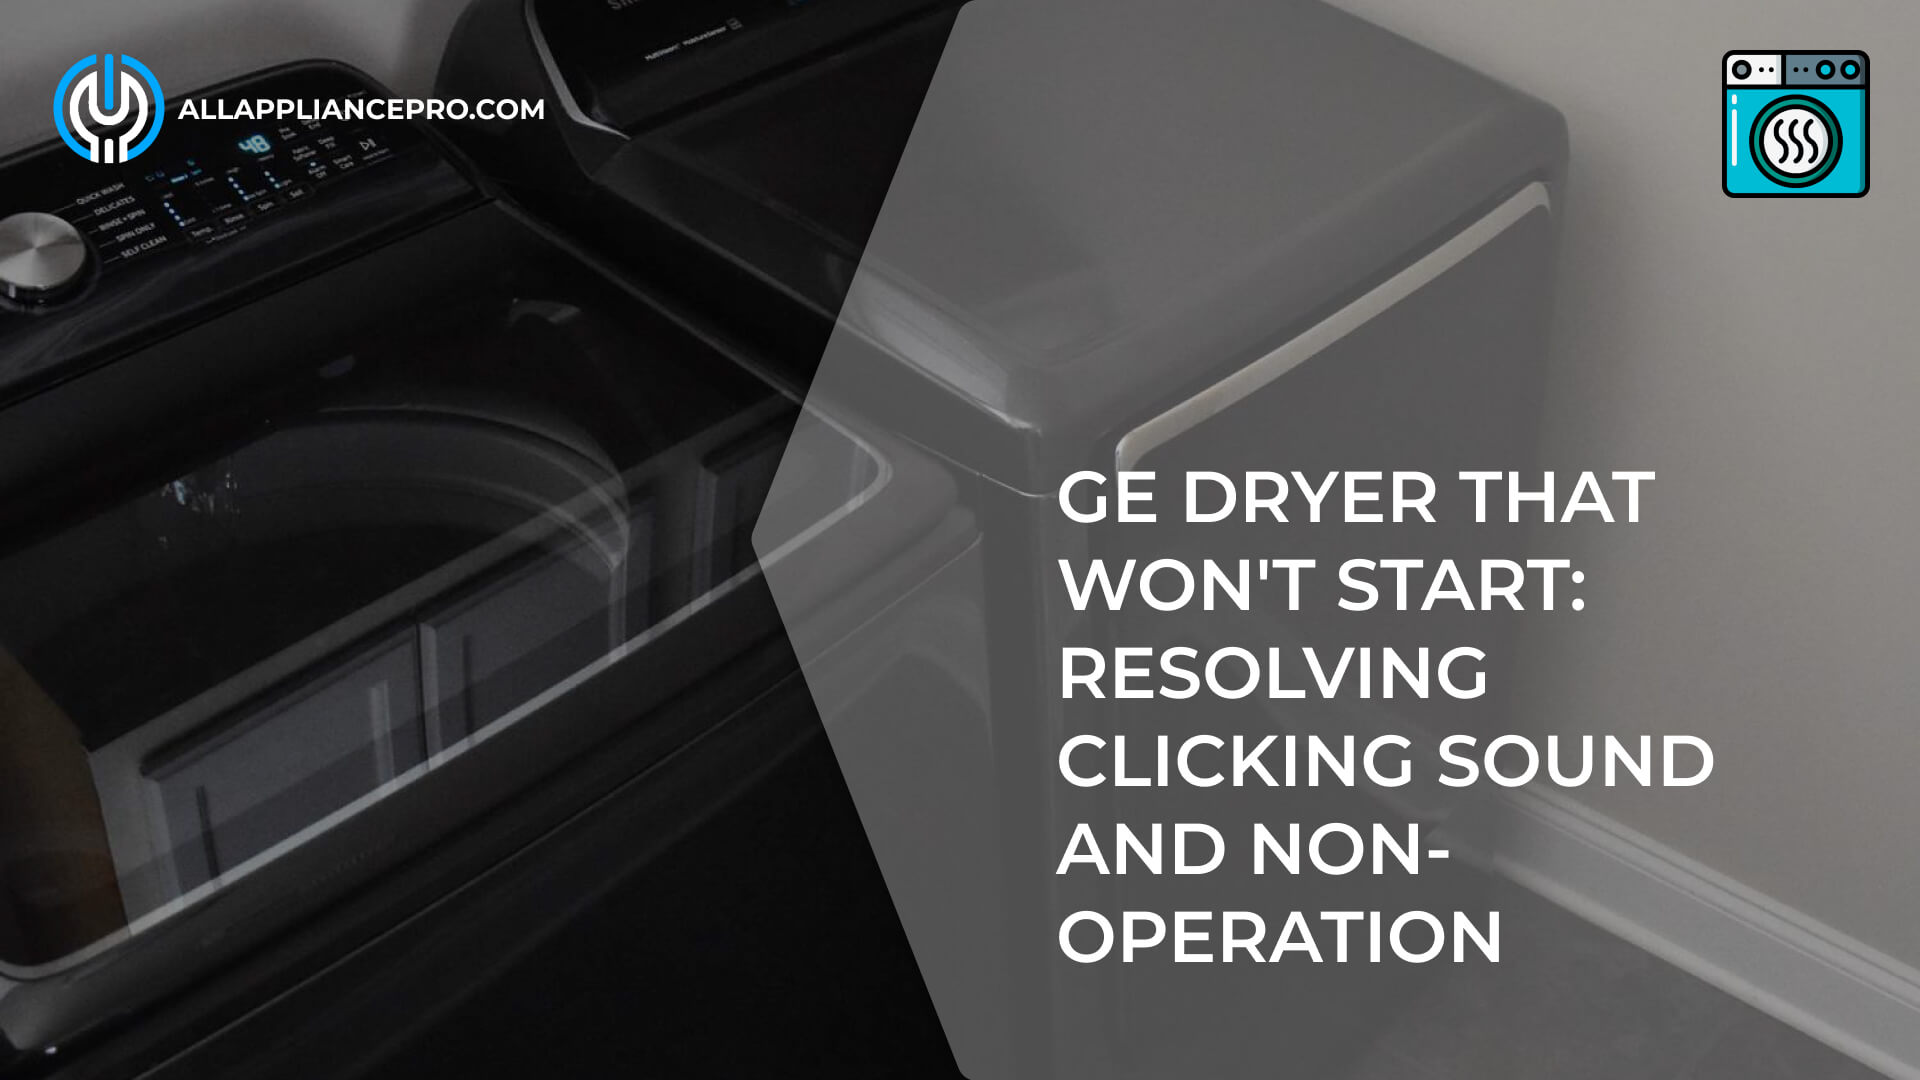 GE Dryer That Won't Start: Resolving Clicking Sound and Non-Operation